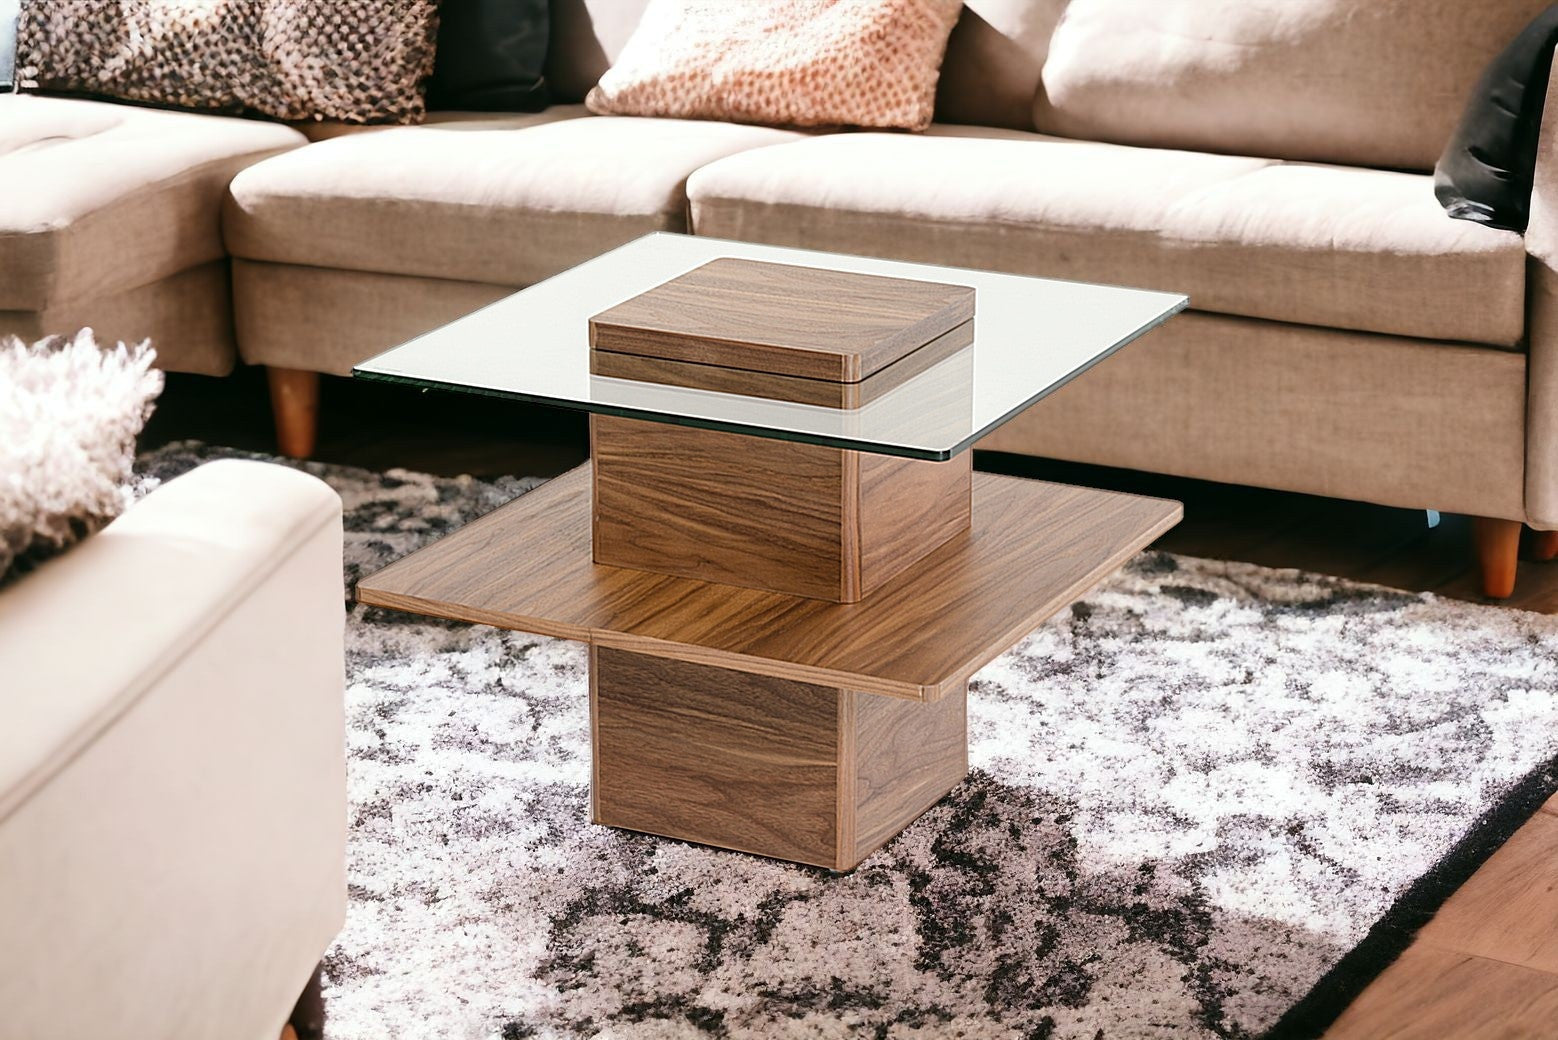 19" Walnut Veneer And Glass End Table